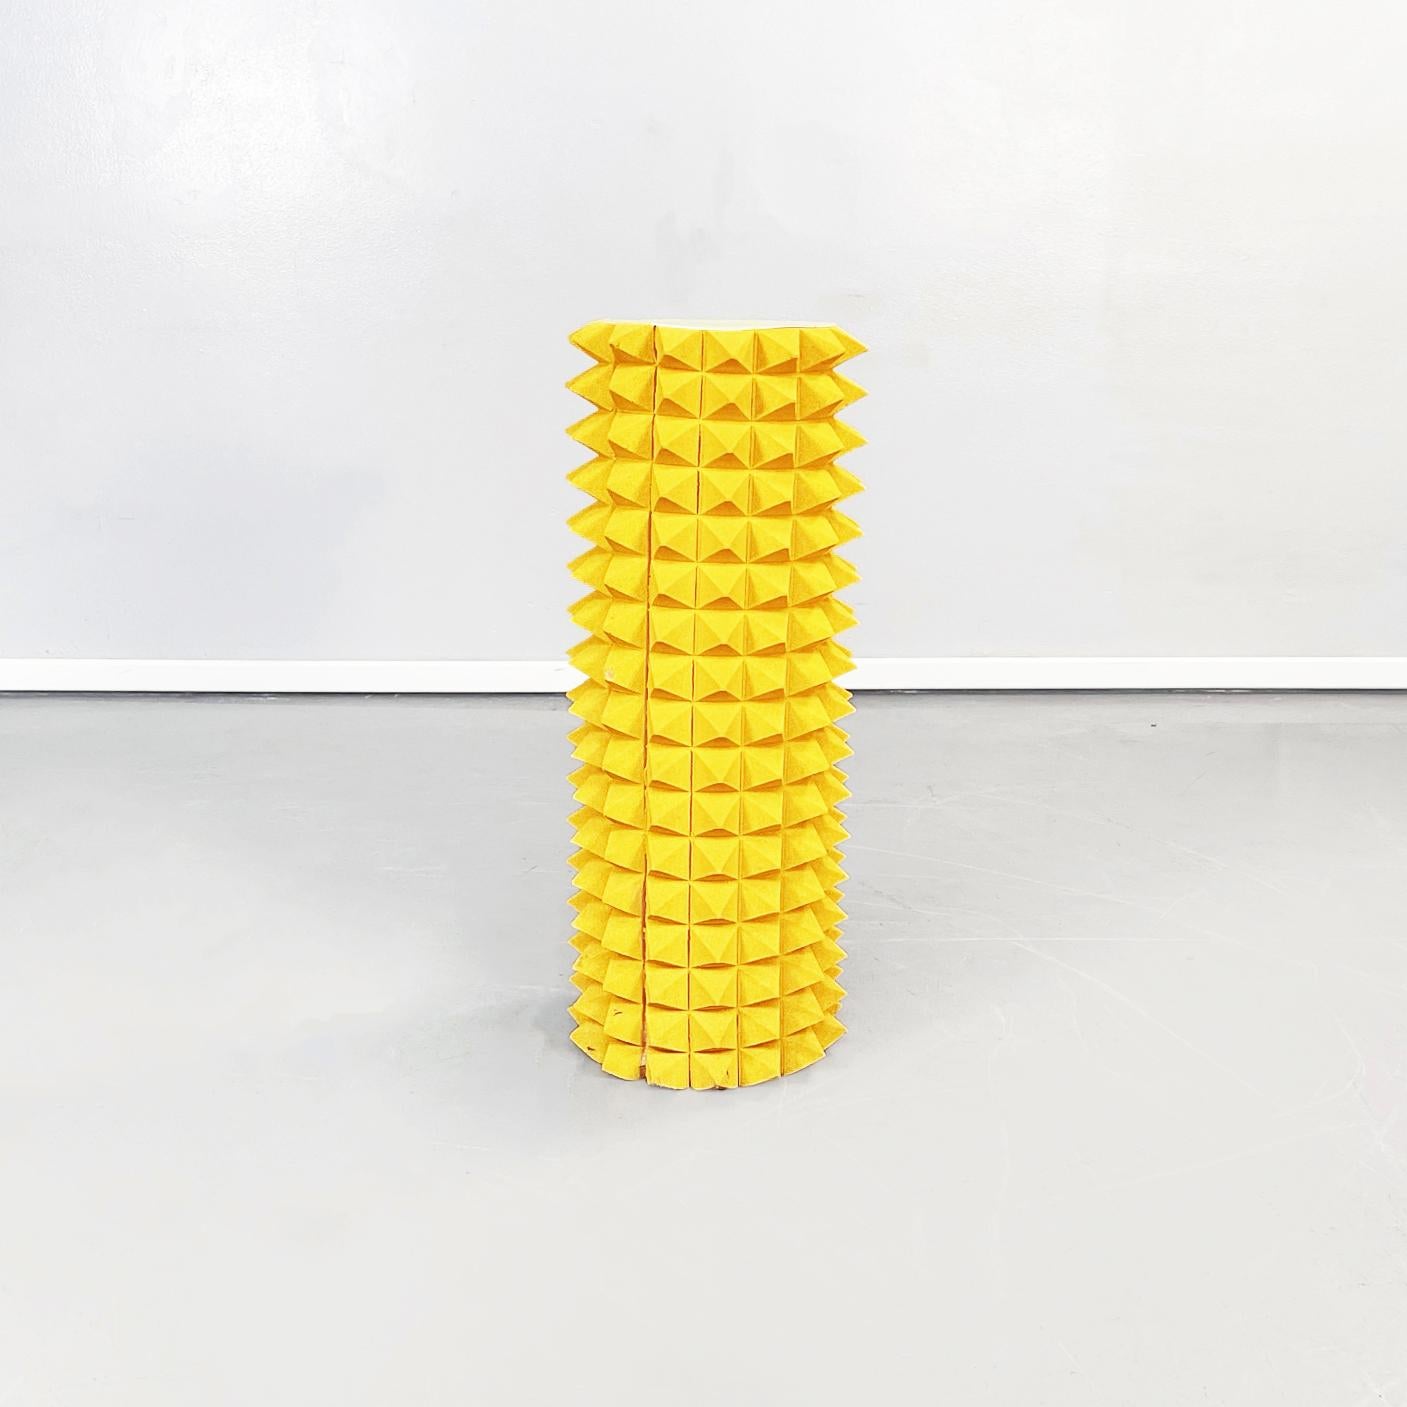 Italian post-modern cylindrical totem with yellow foam dyamond, Probably 2000s period.
The Totem cylindrical is good as expositor or as a column for a small statue or object must be show. The totem have a round top and internal cardboard